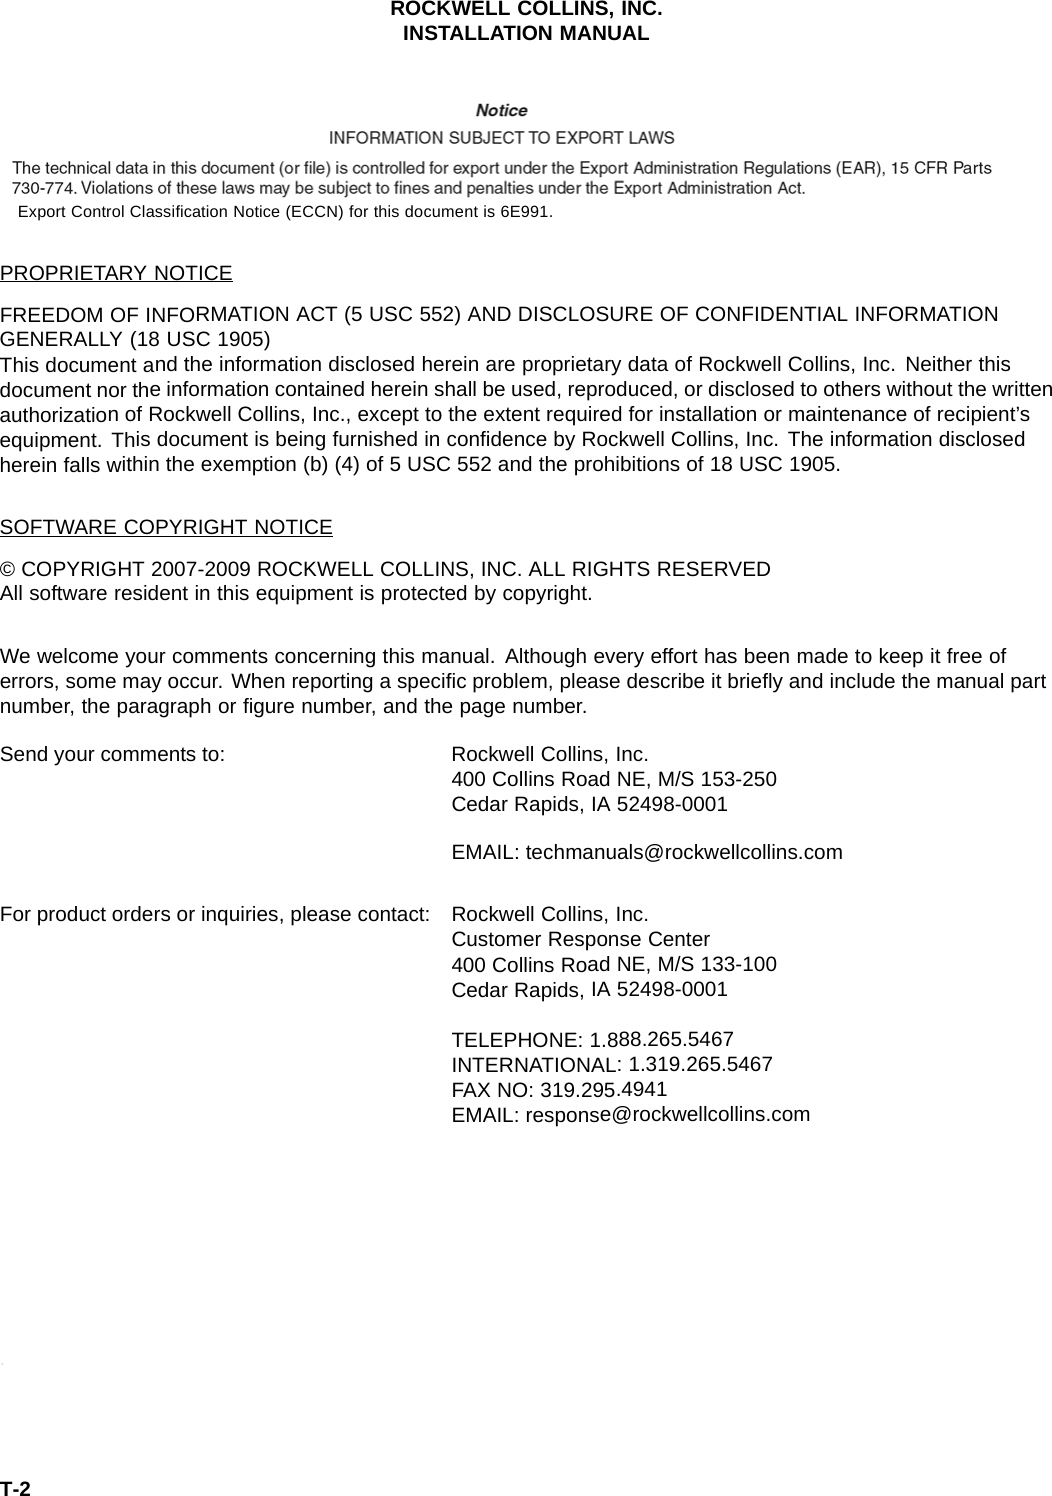 ROCKWELL COLLINS, INC.INSTALLATION MANUALExport Control Classiﬁcation Notice (ECCN) for this document is 6E991.PROPRIETARY NOTICEFREEDOM OF INFORMATION ACT (5 USC 552) AND DISCLOSURE OF CONFIDENTIAL INFORMATIONGENERALLY (18 USC 1905)This document and the information disclosed herein are proprietary data of Rockwell Collins, Inc. Neither thisdocument nor the information contained herein shall be used, reproduced, or disclosed to others without the writtenauthorization of Rockwell Collins, Inc., except to the extent required for installation or maintenance of recipient’sequipment. This document is being furnished in conﬁdence by Rockwell Collins, Inc. The information disclosedherein falls within the exemption (b) (4) of 5 USC 552 and the prohibitions of 18 USC 1905.SOFTWARE COPYRIGHT NOTICE© COPYRIGHT 2007-2009 ROCKWELL COLLINS, INC. ALL RIGHTS RESERVEDAll software resident in this equipment is protected by copyright.We welcome your comments concerning this manual. Although every effort has been made to keep it free oferrors, some may occur. When reporting a speciﬁc problem, please describe it brieﬂy and include the manual partnumber, the paragraph or ﬁgure number, and the page number.Send your comments to: Rockwell Collins, Inc.400 Collins Road NE, M/S 153-250Cedar Rapids, IA 52498-0001EMAIL: techmanuals@rockwellcollins.comFor product orders or inquiries, please contact: Rockwell Collins, Inc.Customer Response Center400 Collins Road NE, M/S 133-100Cedar Rapids, IA 52498-0001TELEPHONE: 1.888.265.5467INTERNATIONAL: 1.319.265.5467FAX NO: 319.295.4941EMAIL: response@rockwellcollins.com.T-2